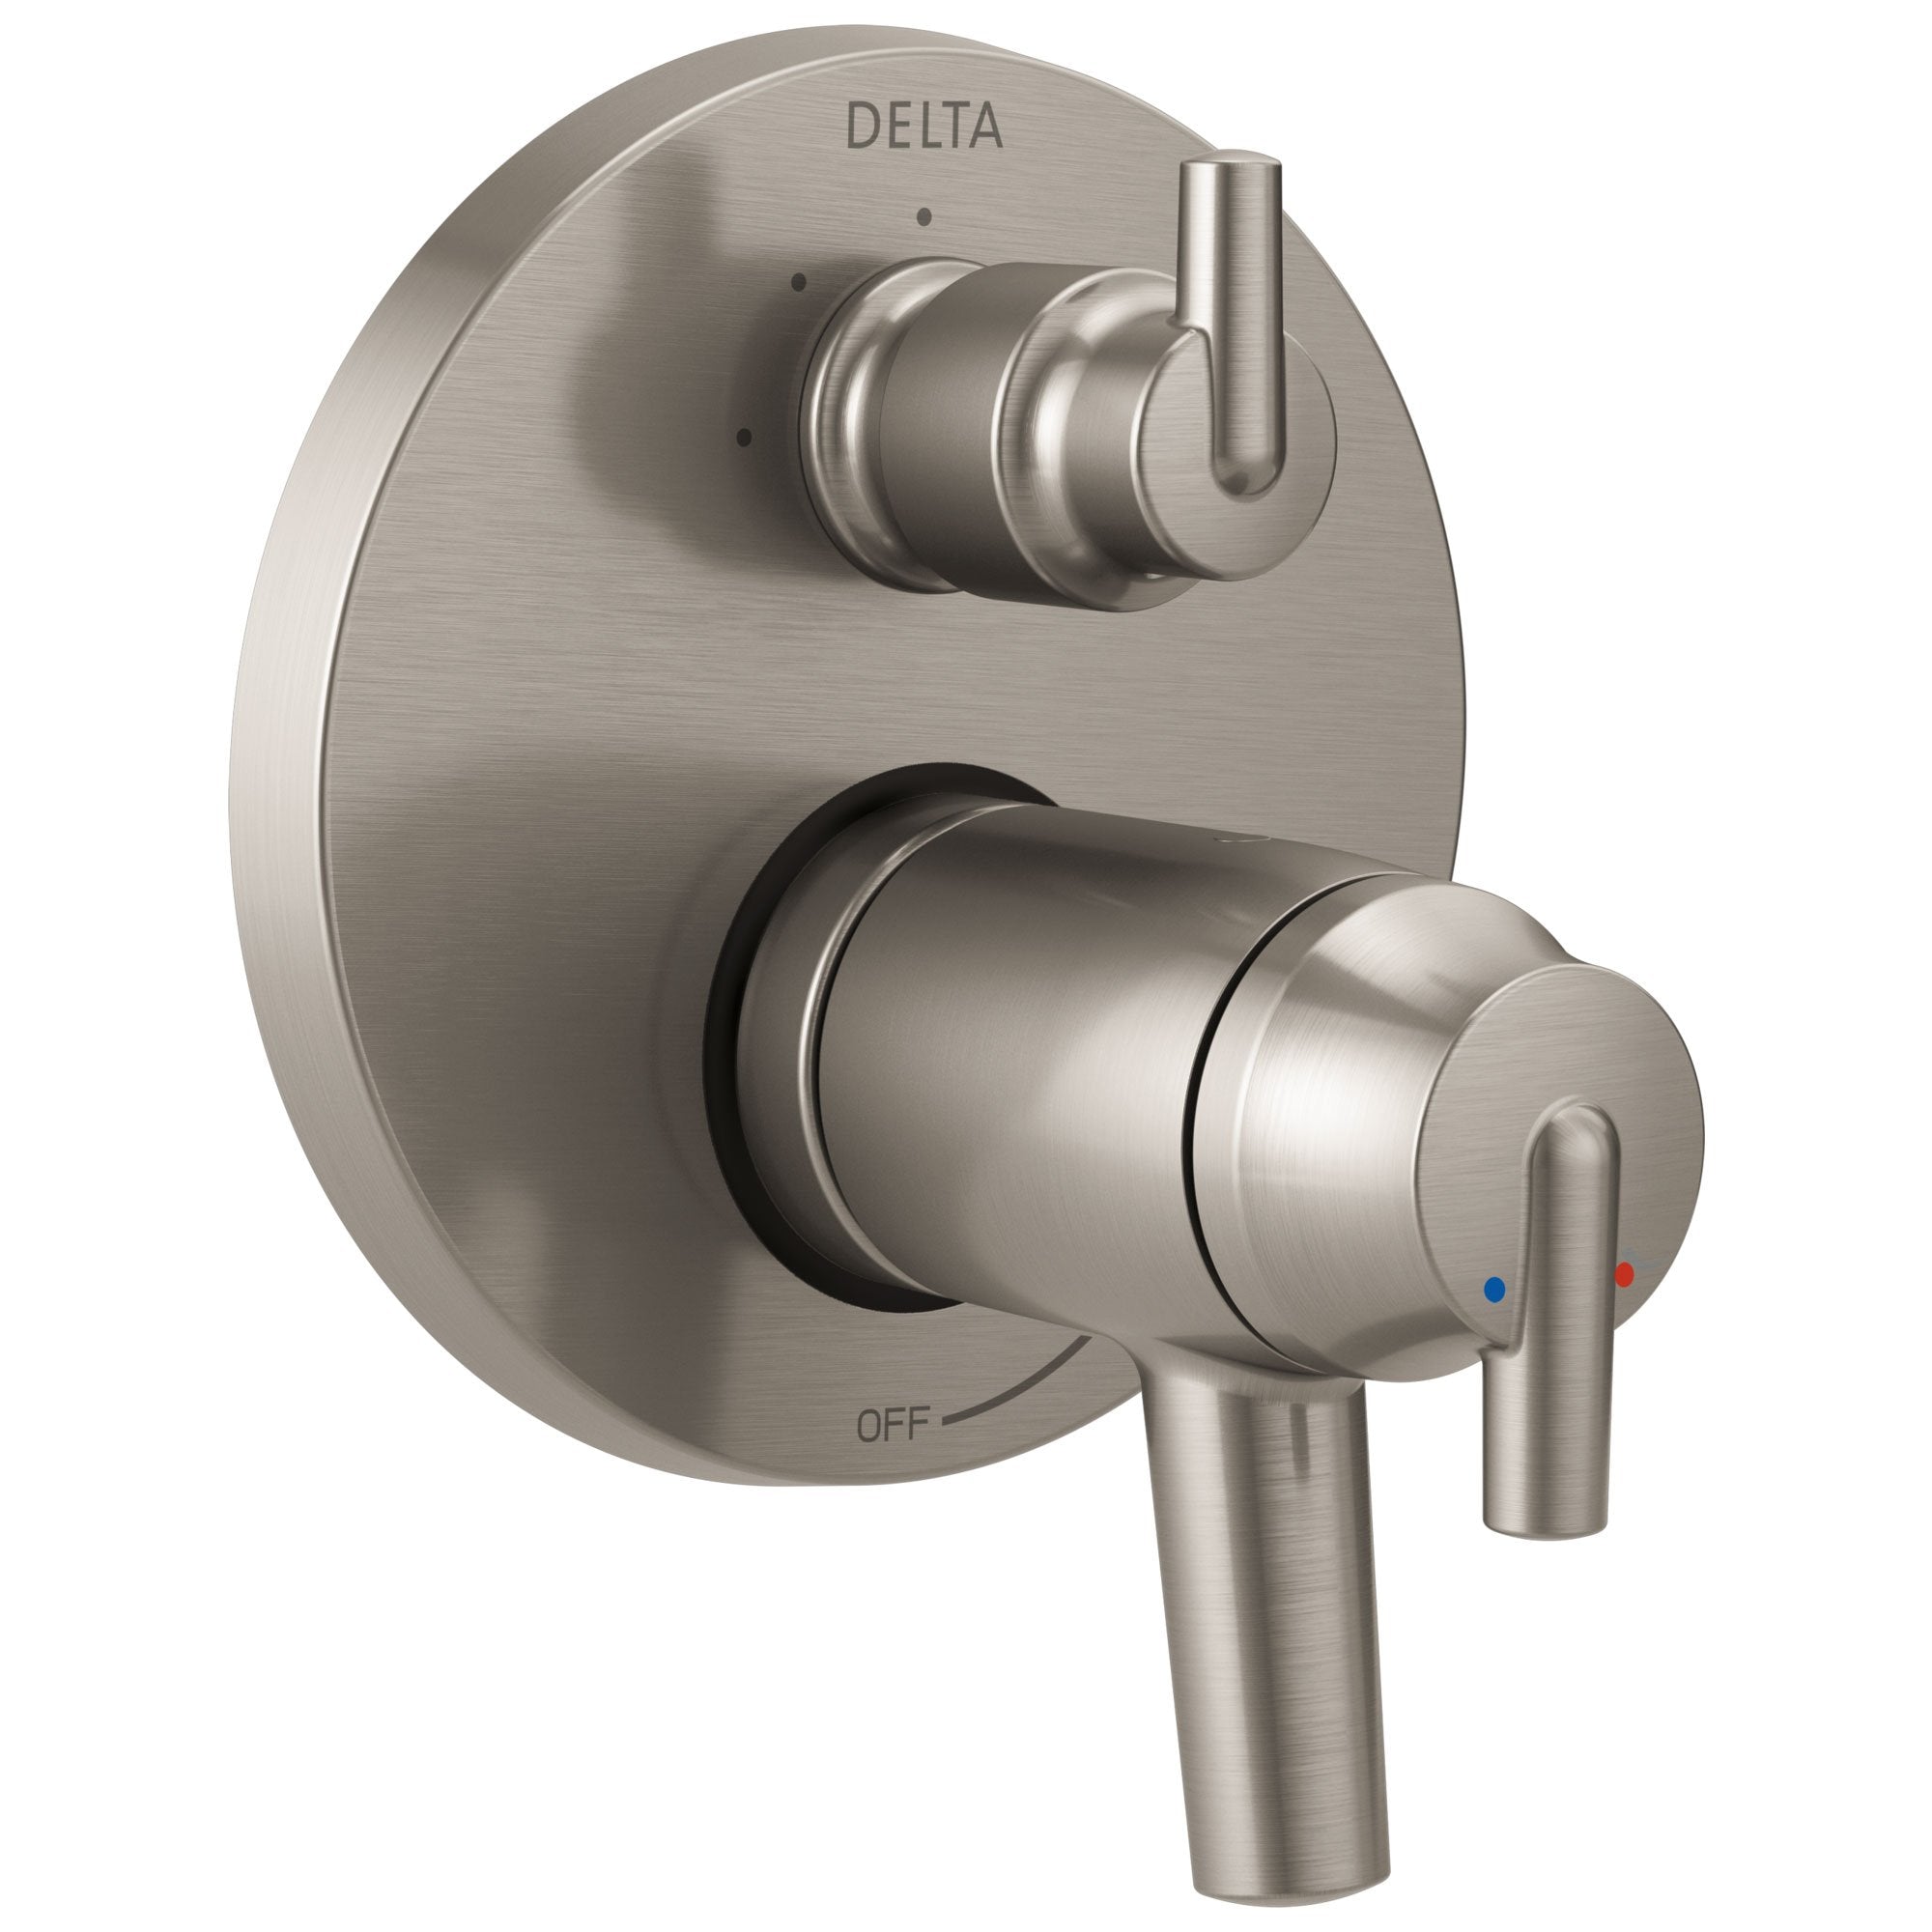 Delta Trinsic Stainless Steel Finish Thermostatic Shower Faucet Control with 3-Setting Integrated Diverter Includes Trim Kit and Valve without Stops D2136V